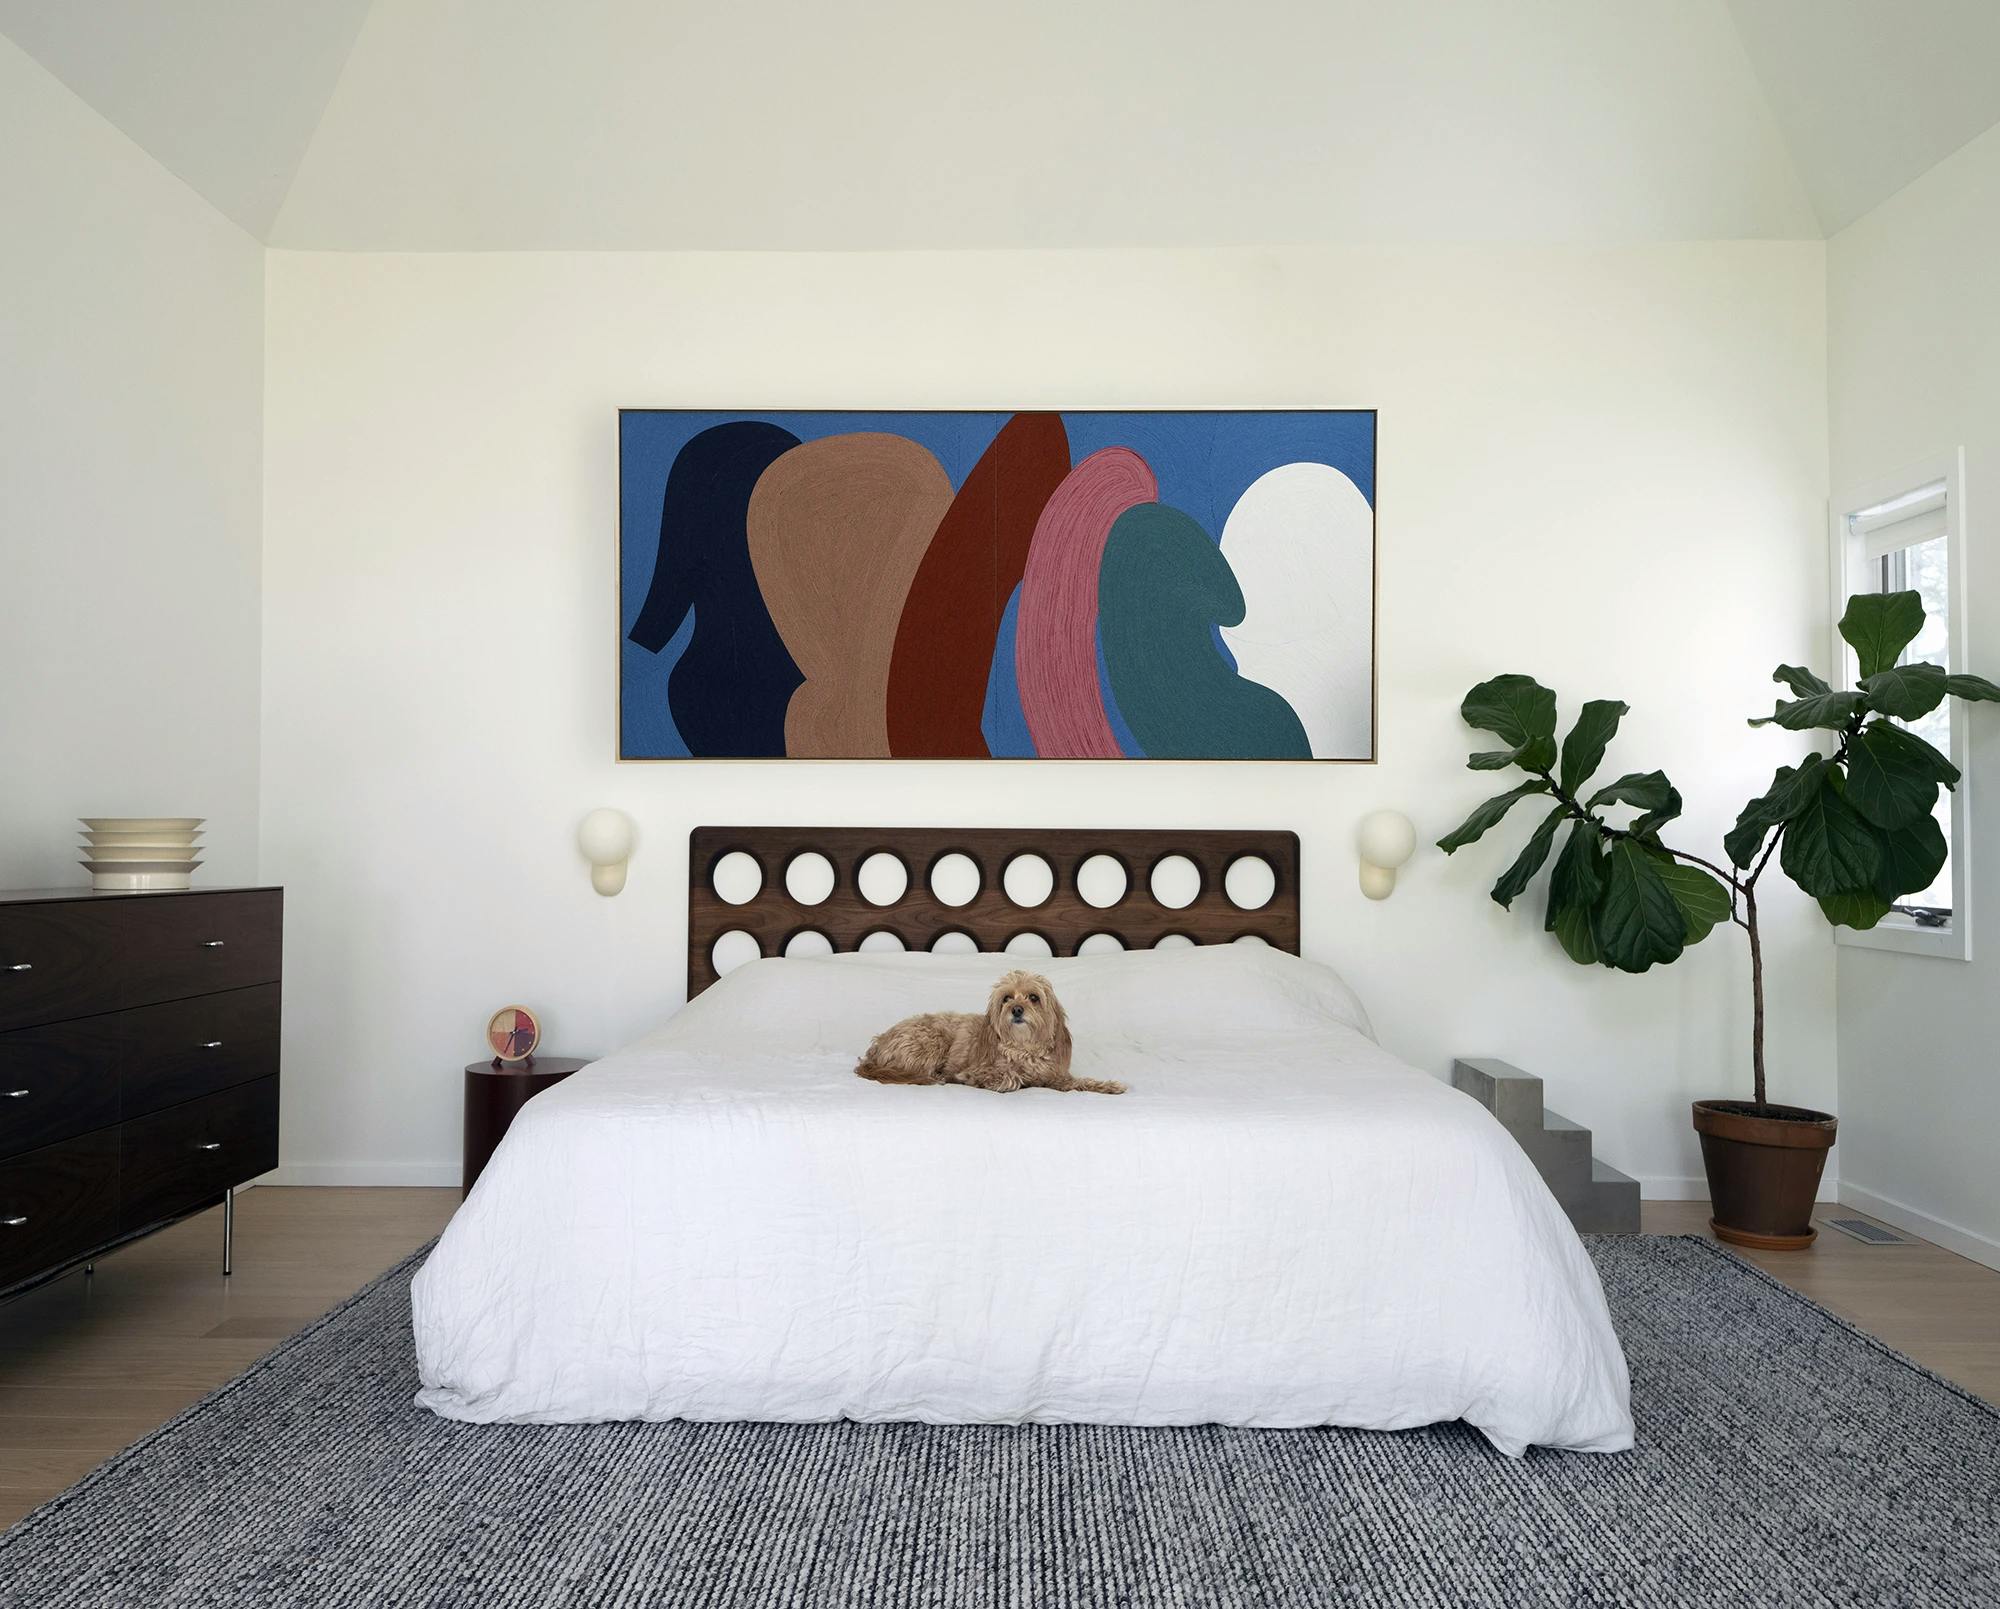 Artwork by Paola Rodriguez Arias above a bed with a wooden headboard. 